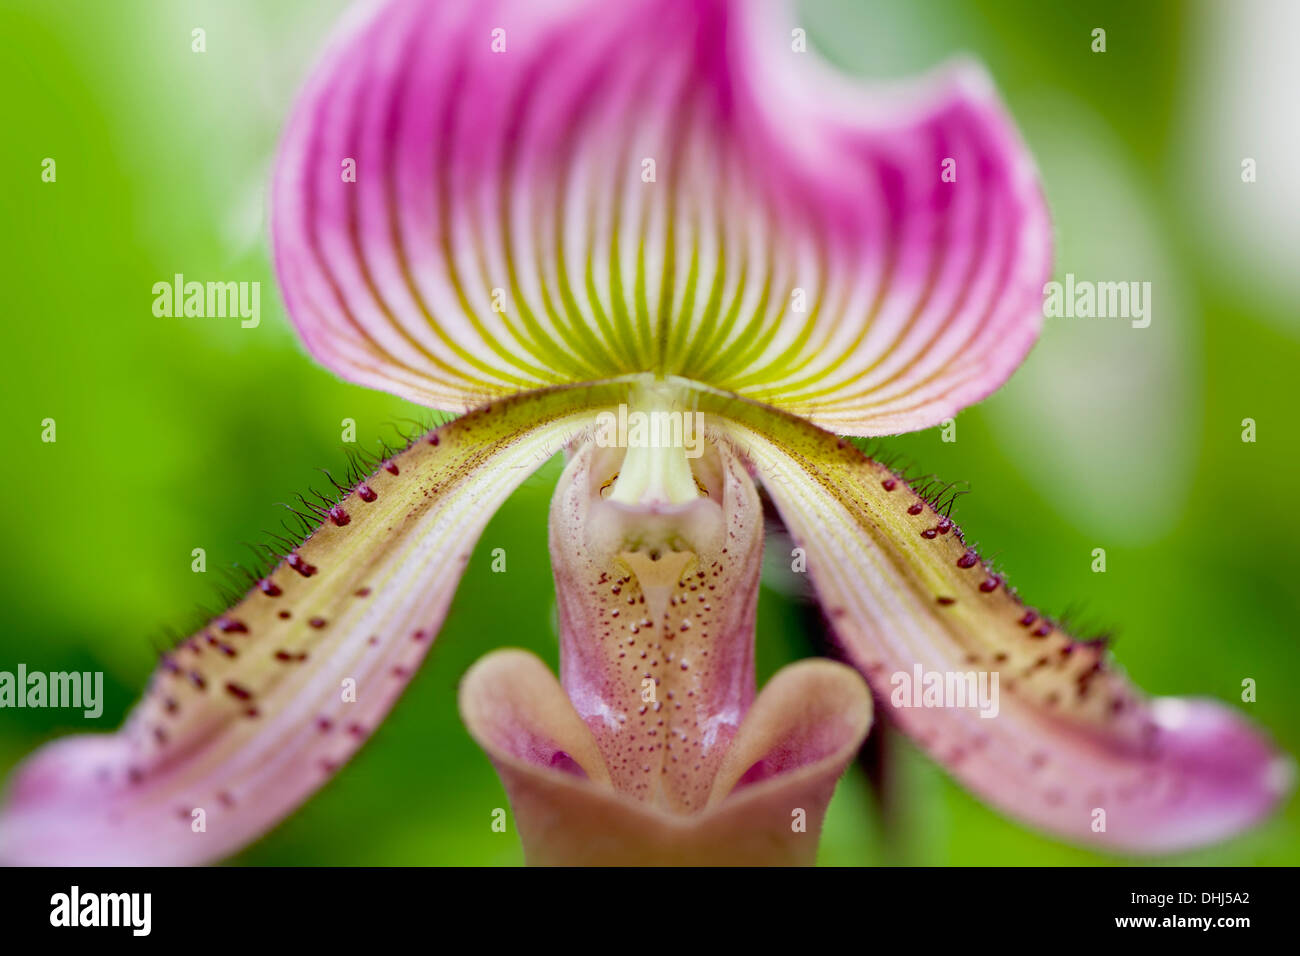 Close-up image of beautiful pink Paphiopedilum flower commonly known as the Slipper Orchid, image taken against a soft background Stock Photo